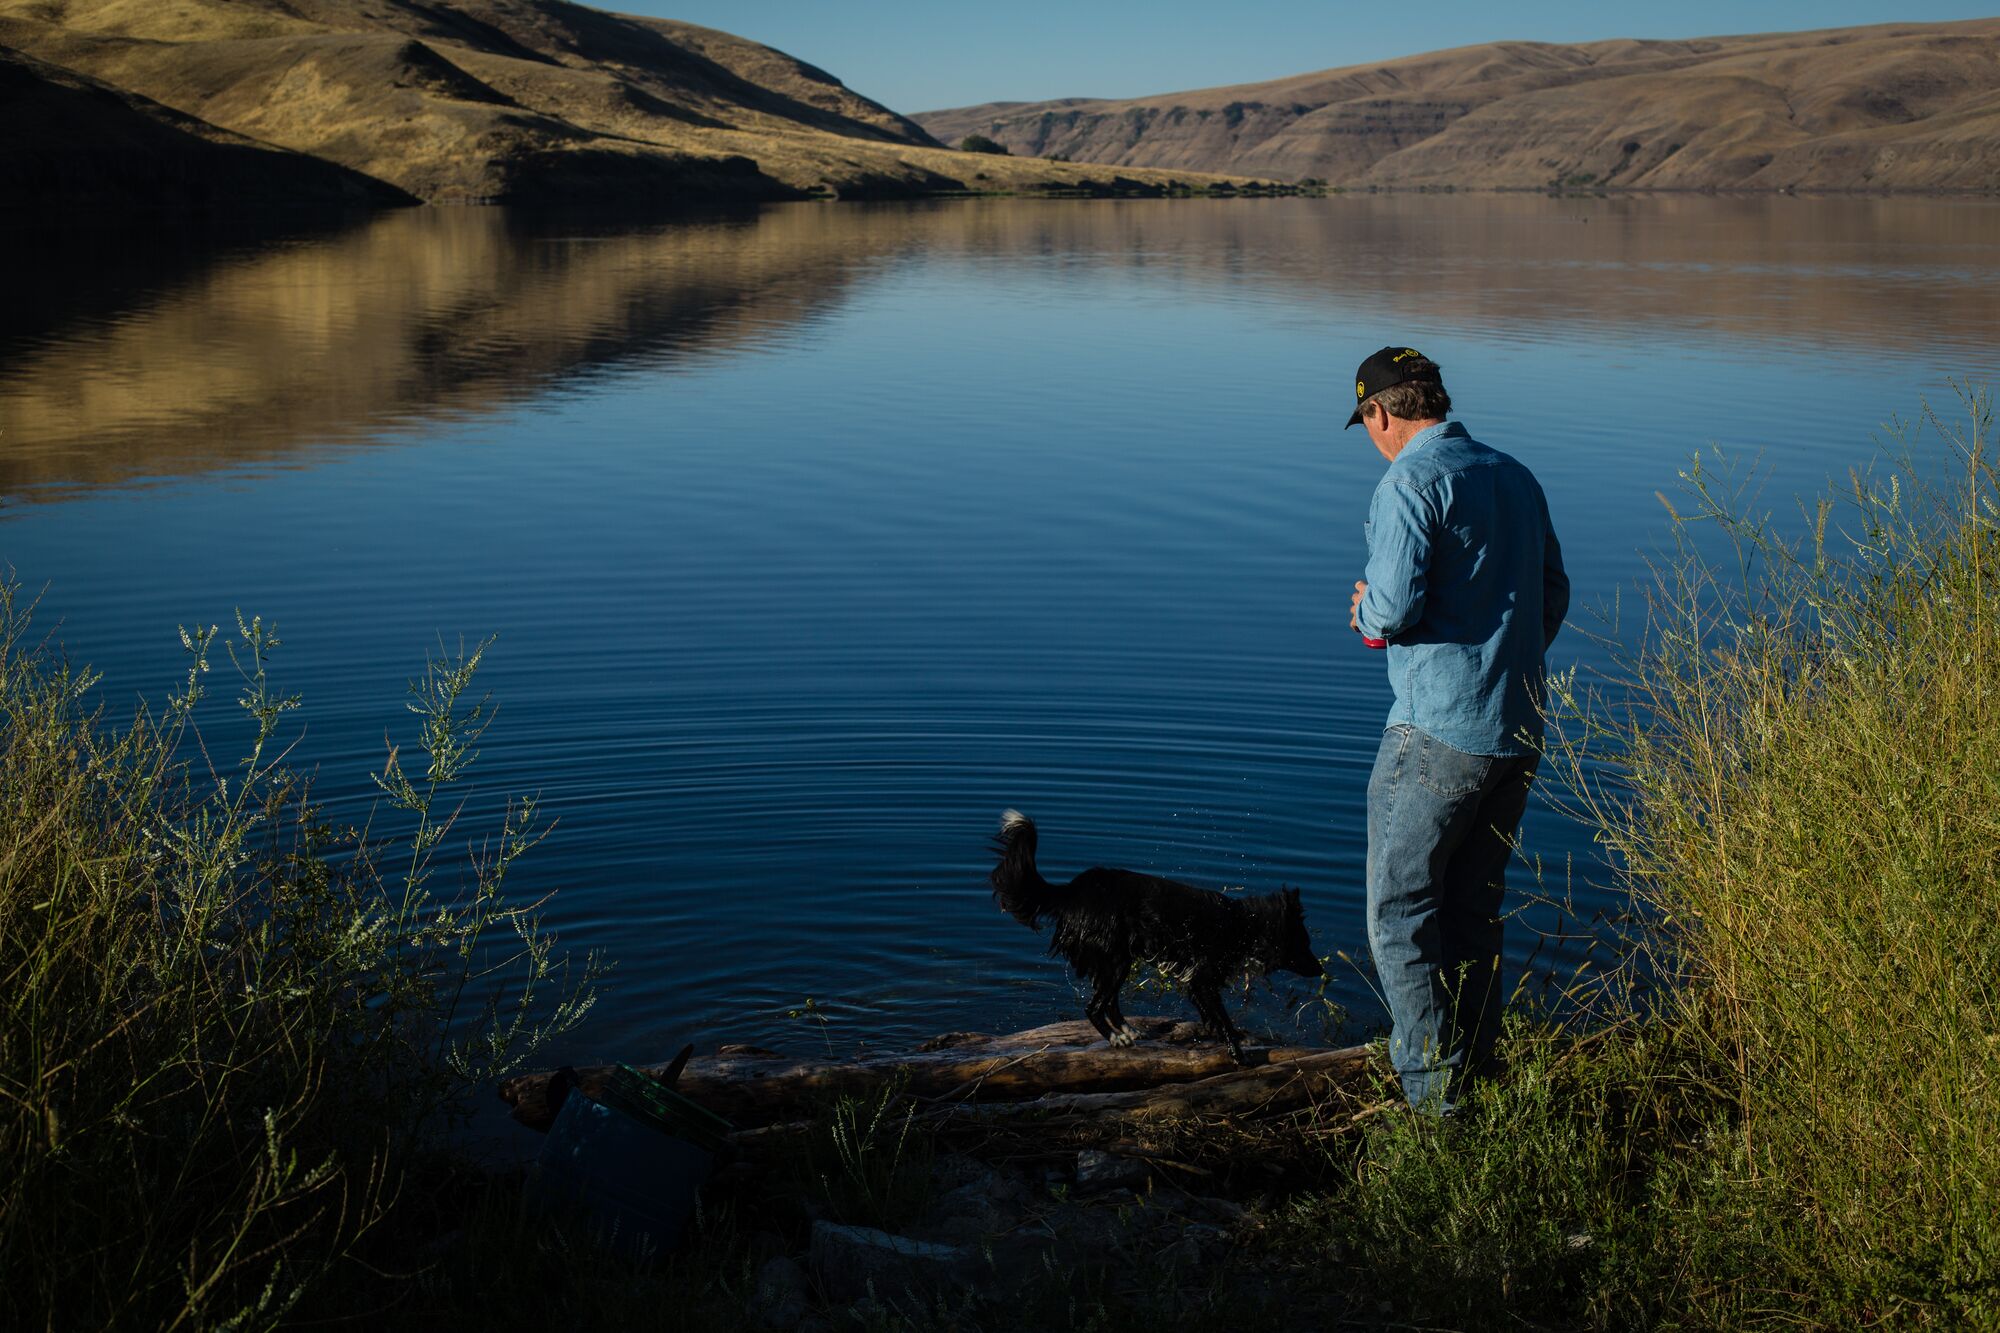 Bryan Jones, a farmer on the Paloose in eastern Washington, walks with his dog along Lake Bryan. The lake is one of a series that was created when the free flowing lower Snake River was dammed in the 1970s.